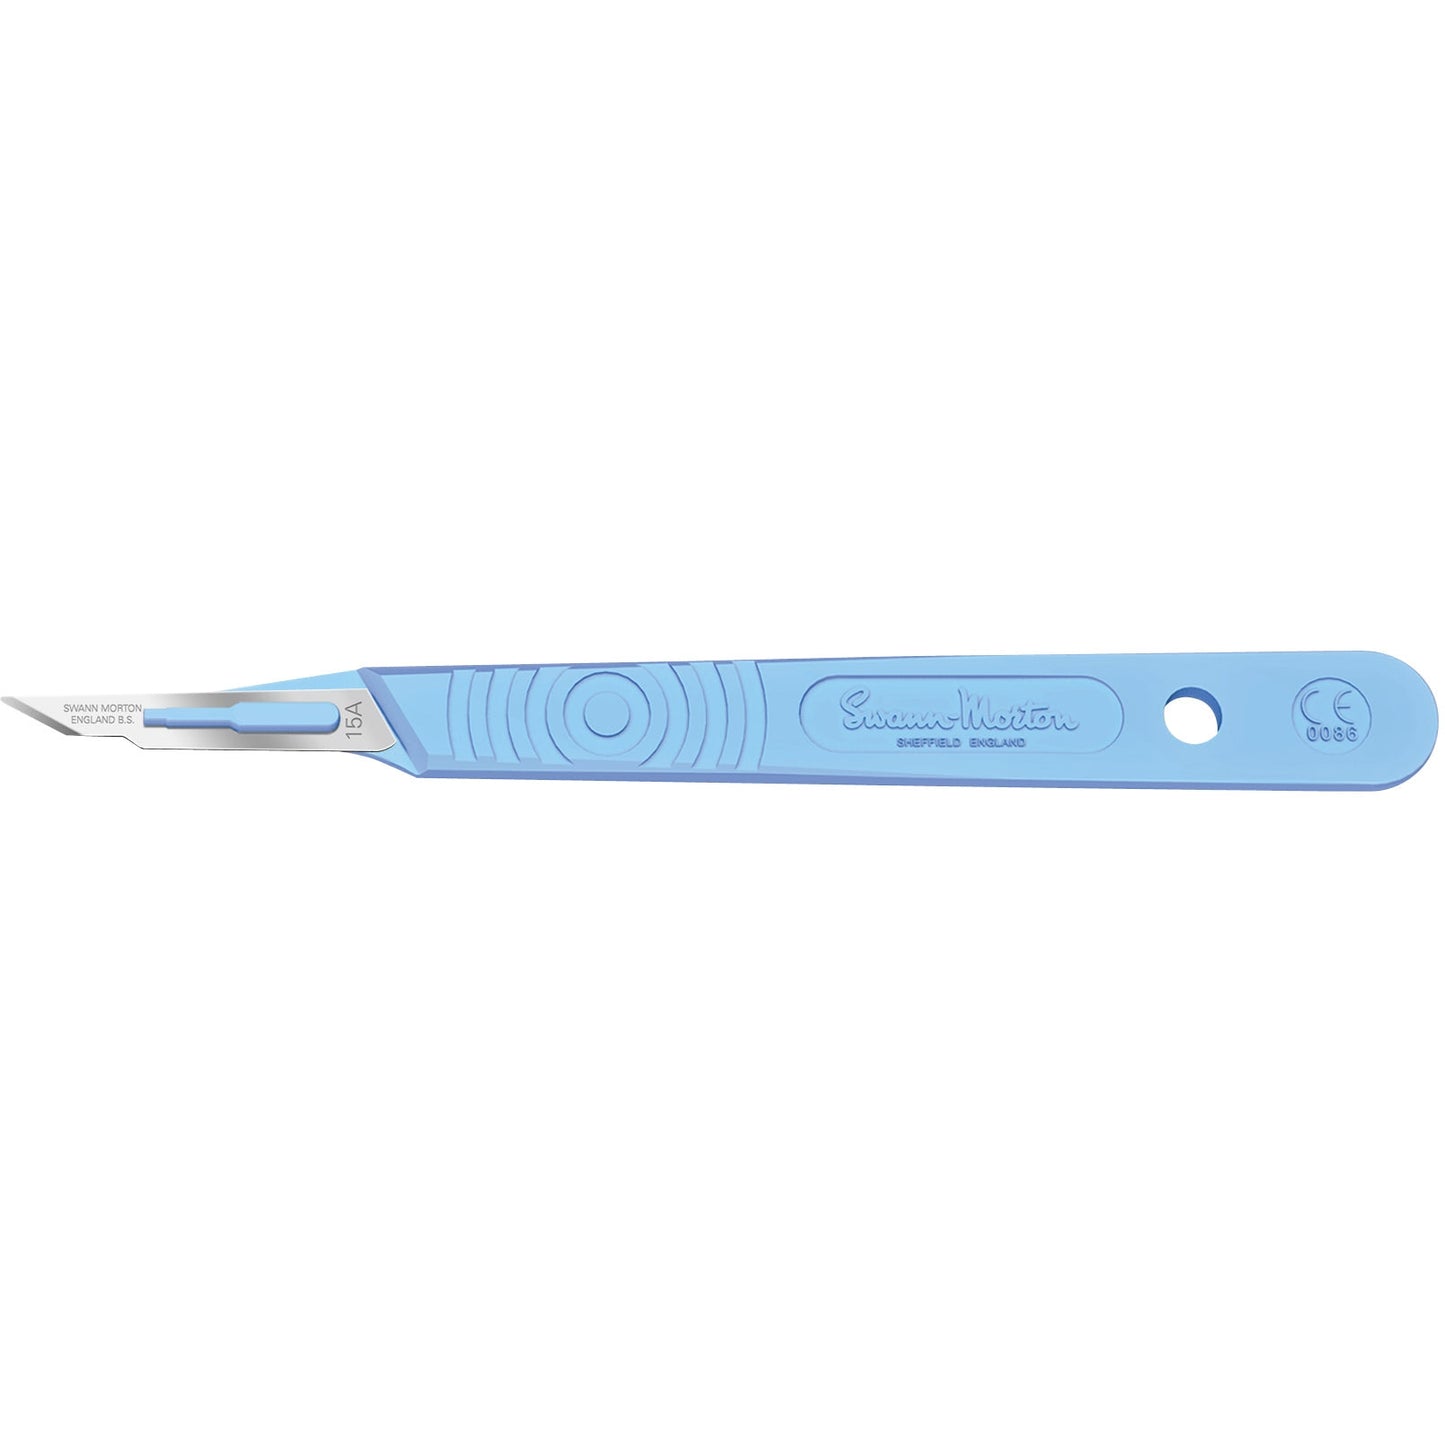 Sterile Disposable Scalpel No.15a Blade with Polystyrene Handle x 10